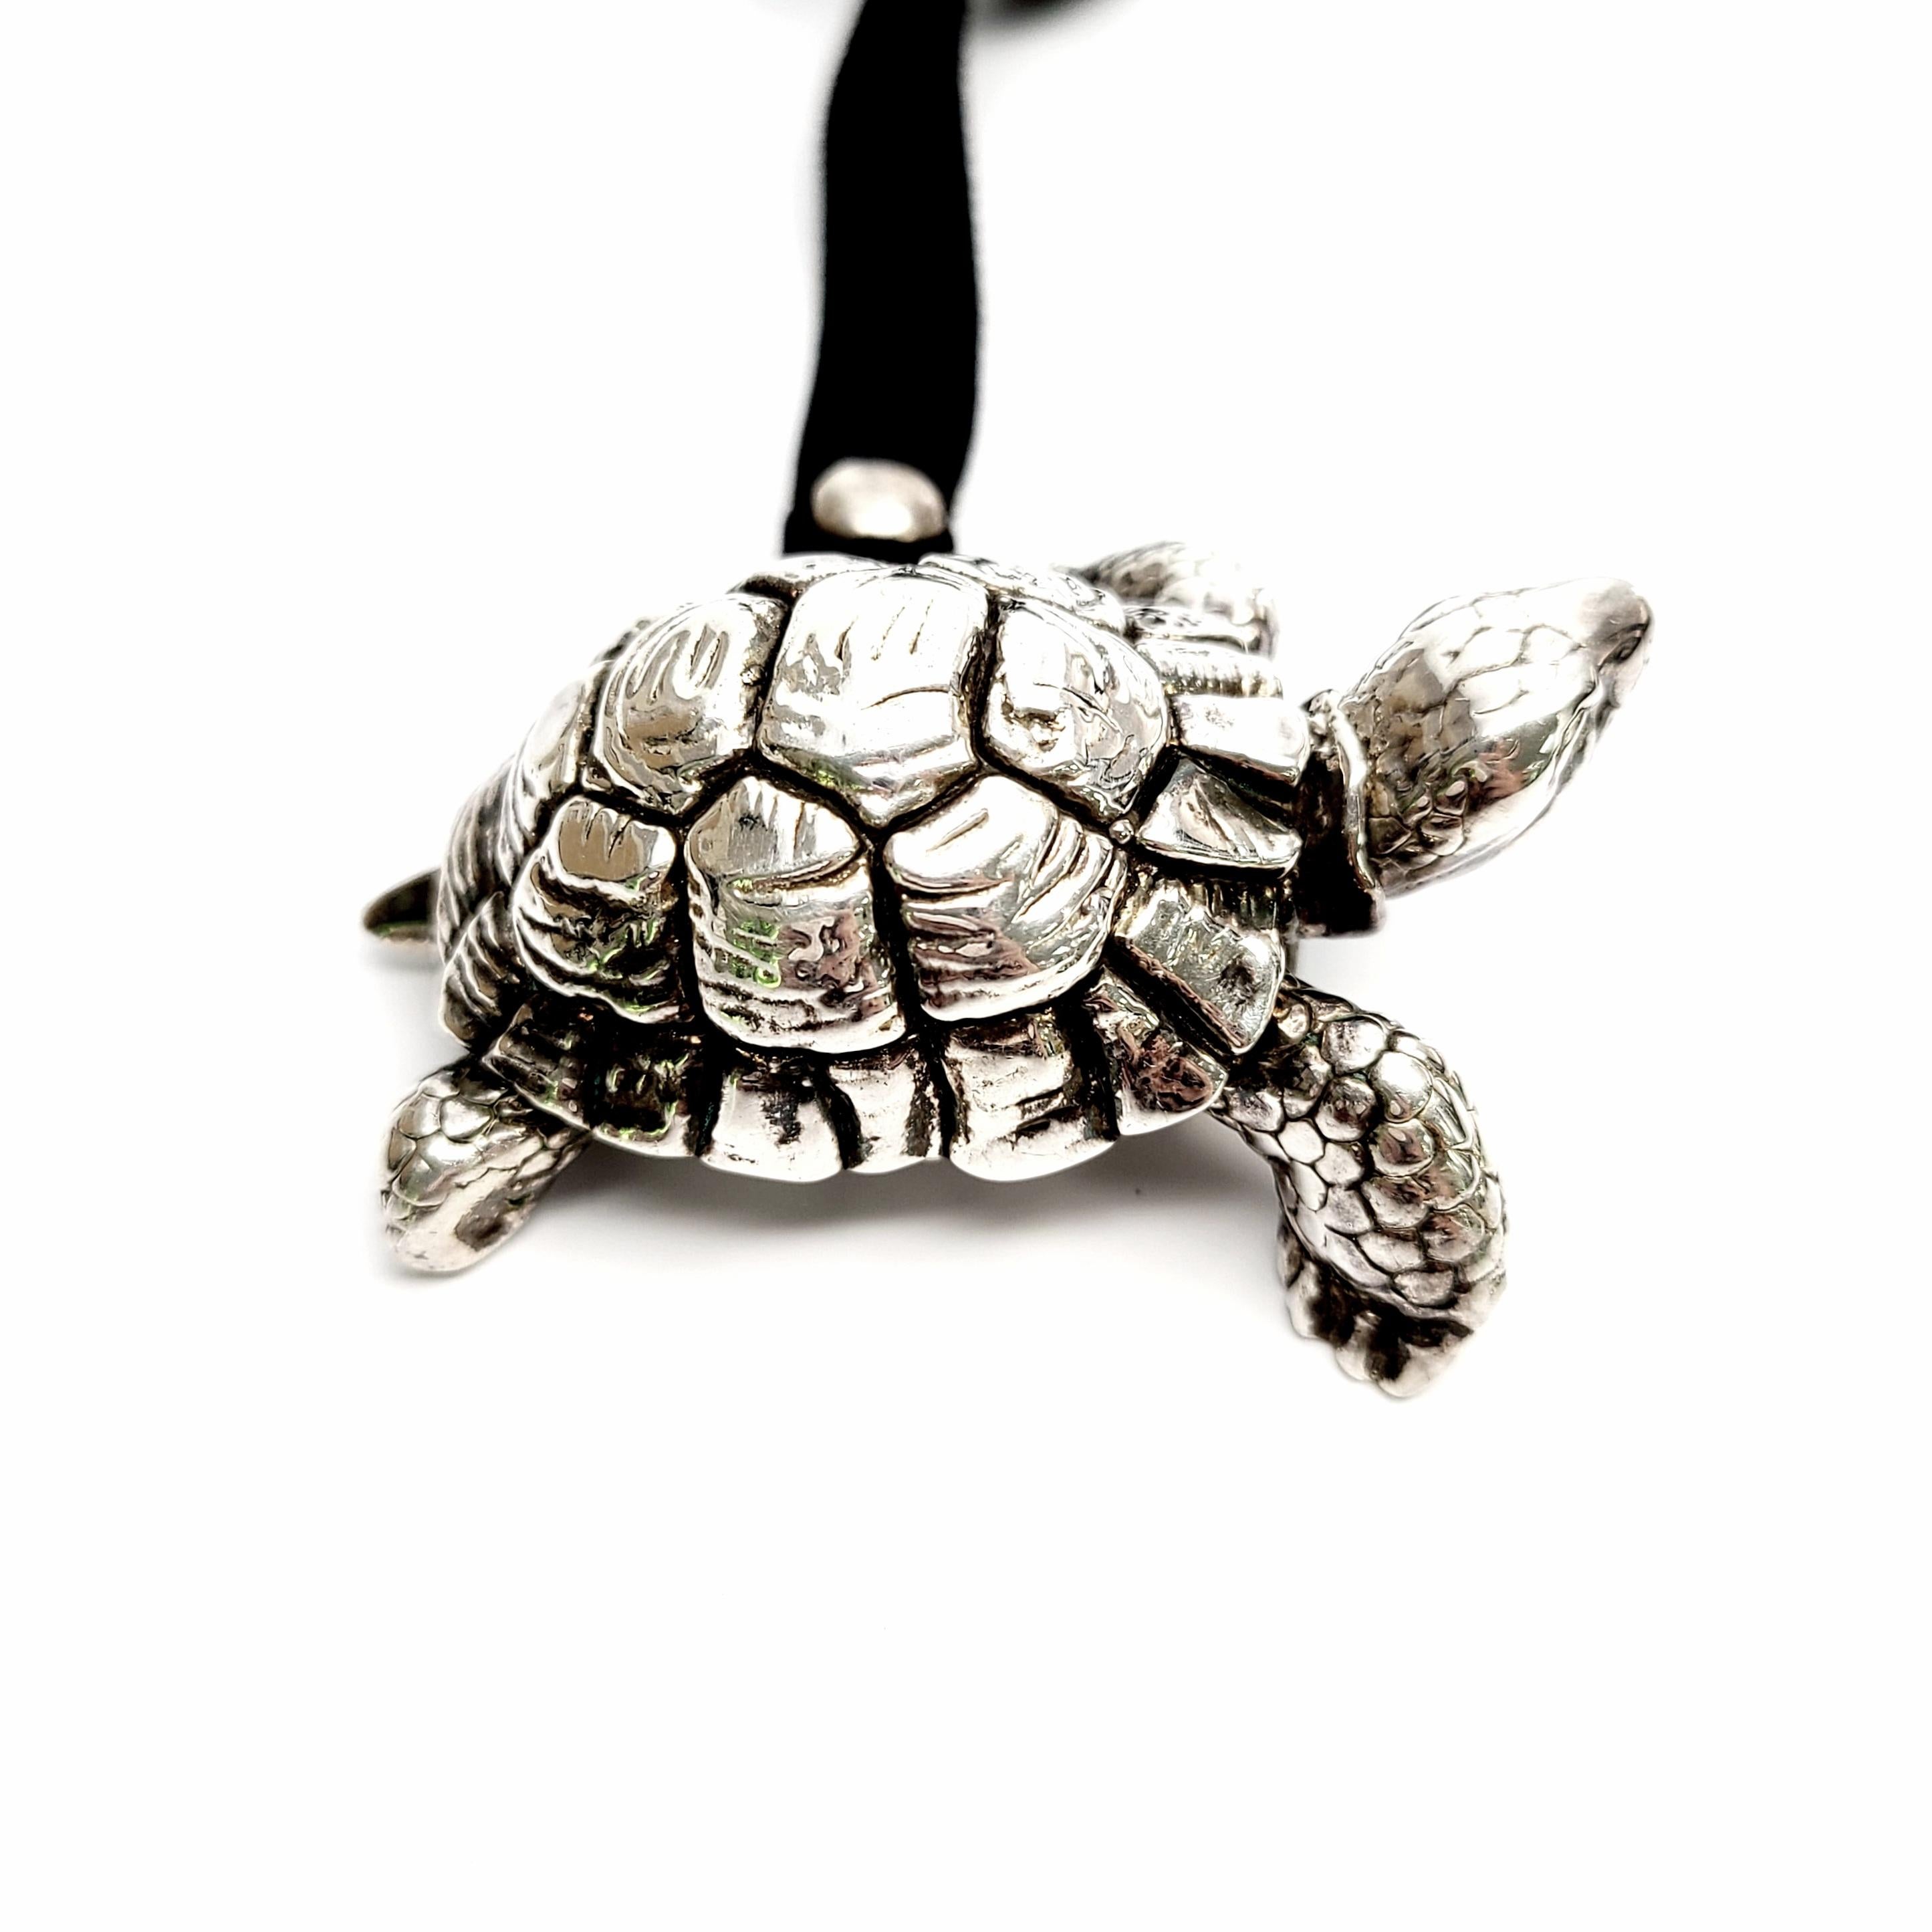 Vintage sterling silver on wax turtle charm on a velvet tie.

Beautifully detailed large but lightweight turtle on velvet tie with silver woven design endcaps.

Turtle measures approx 2 1/4